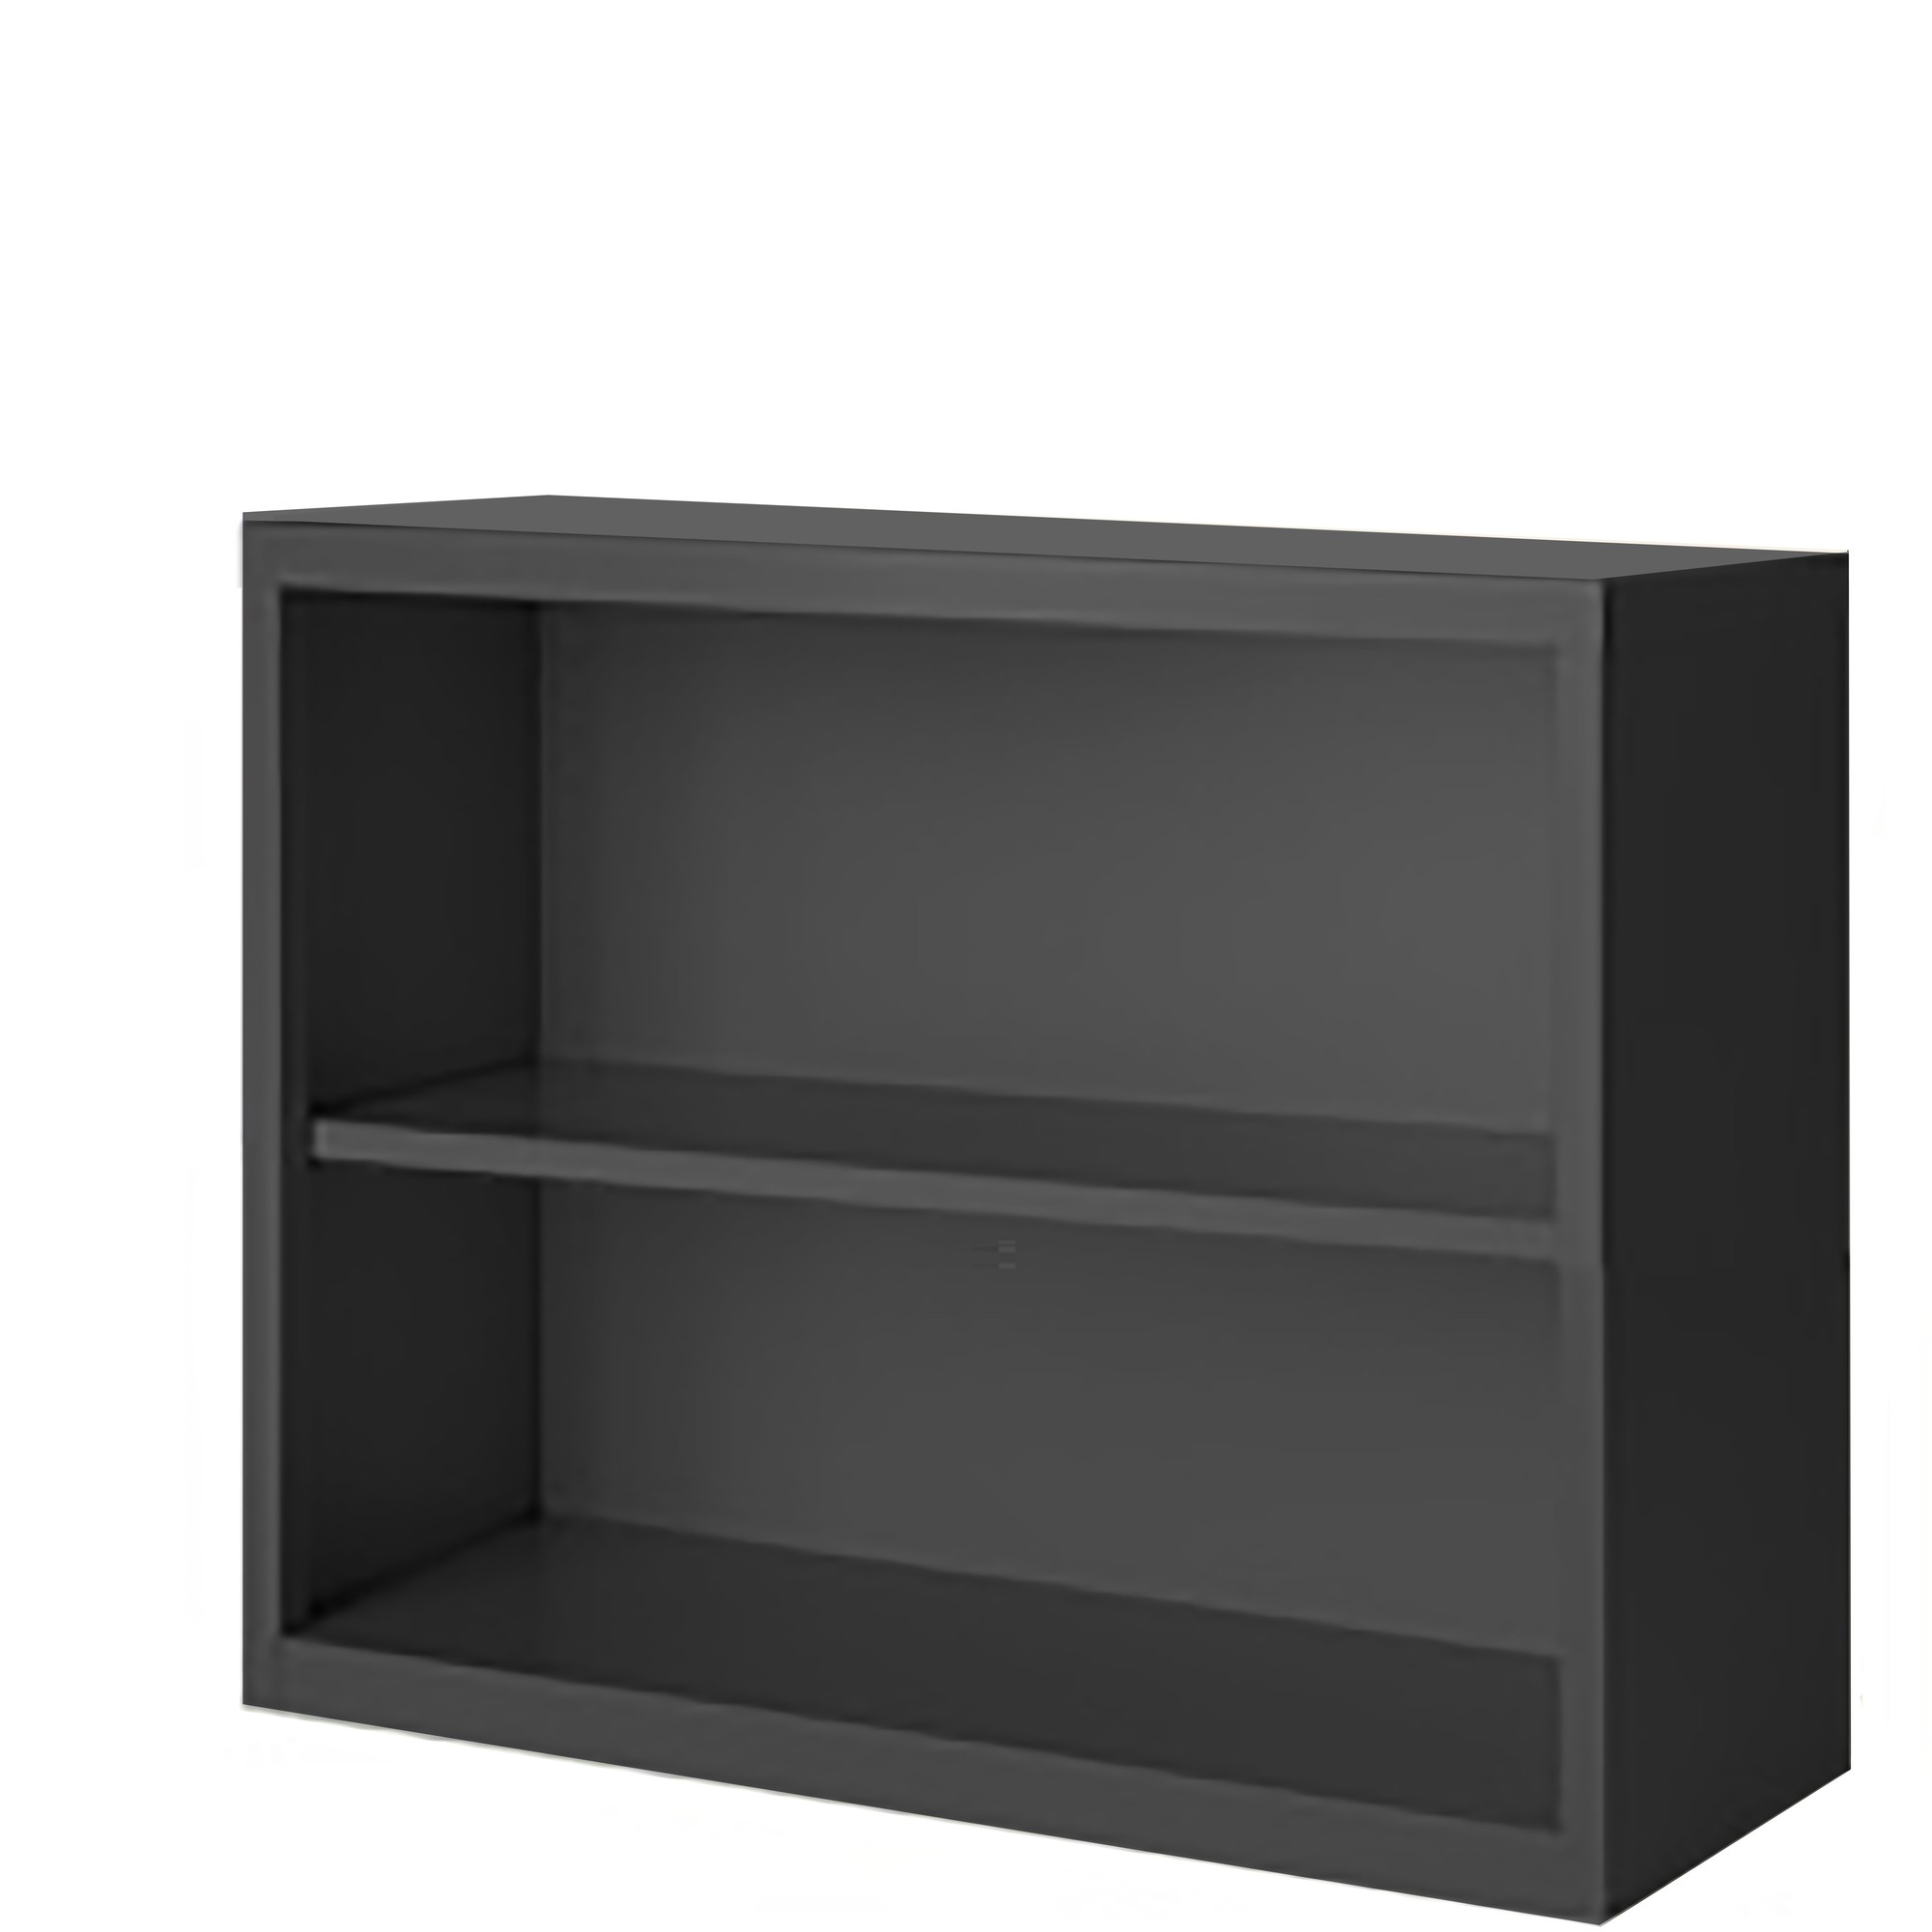 Steel Cabinets USA, 36Inchx18Inchx30Inch Charcoal Bookcase Steel Full Assembled, Height 30 in, Shelves (qty.) 2, Material Steel, Model BCA-363018-C